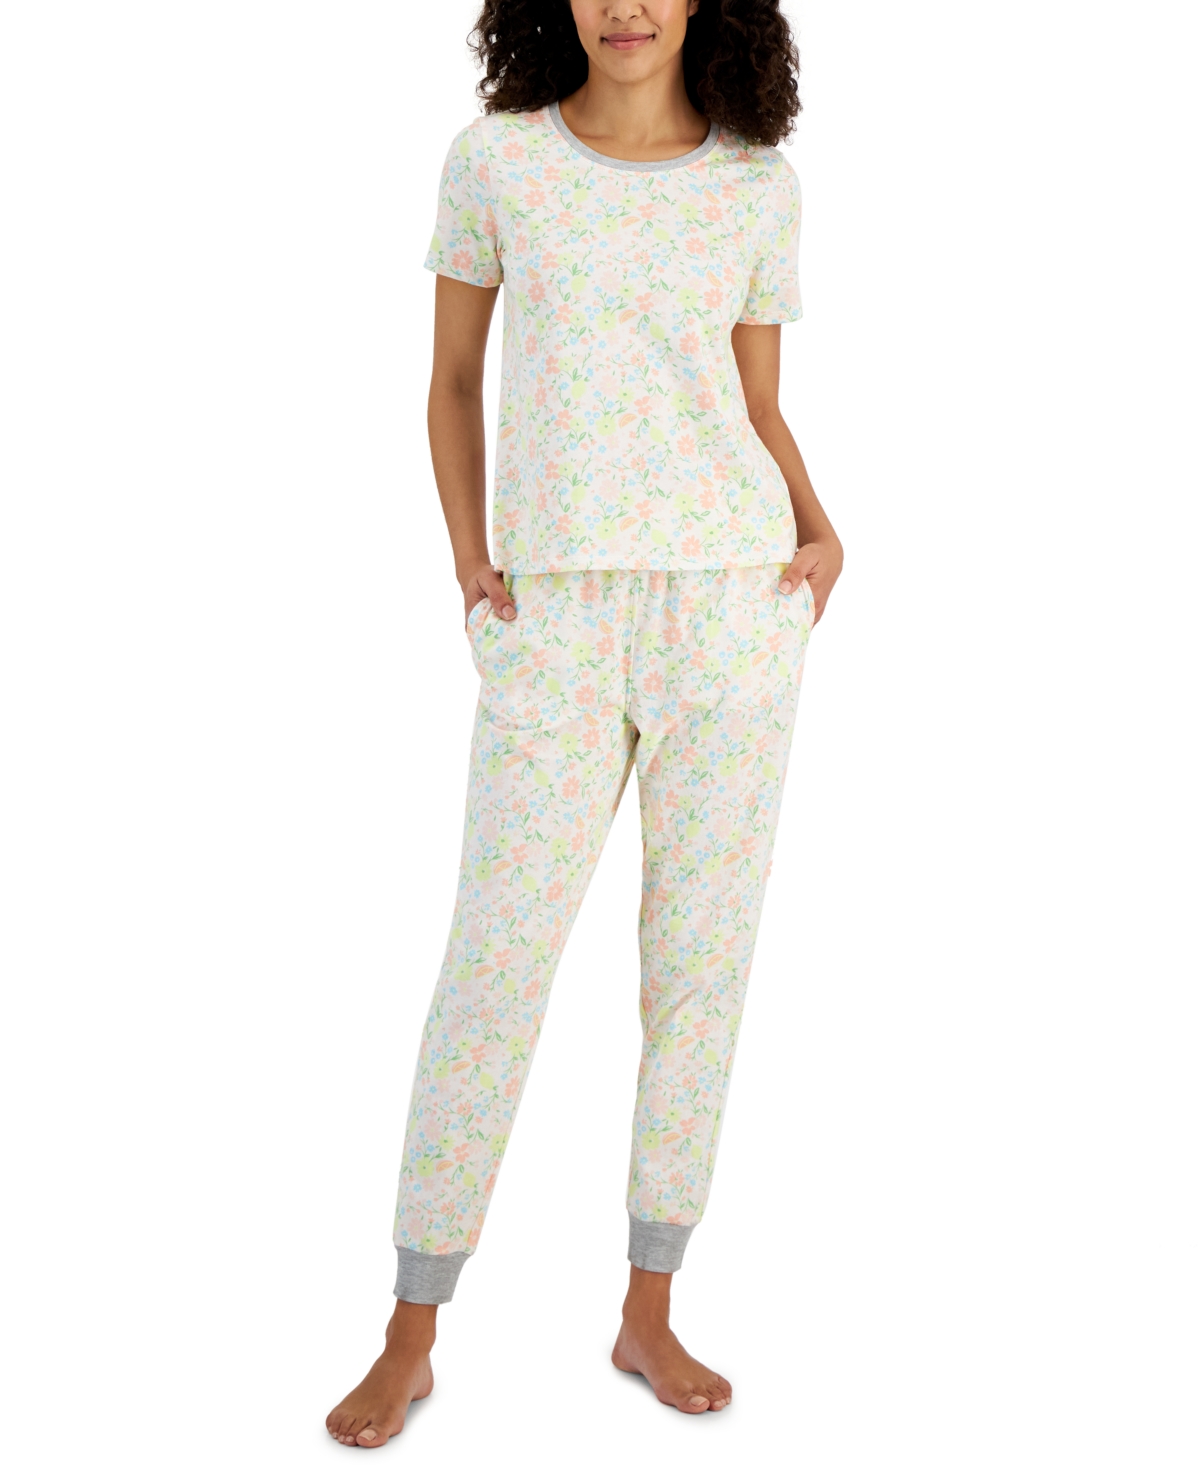 Women's Fruity Floral Pajamas Set, Created for Macy's - Floral Fruits